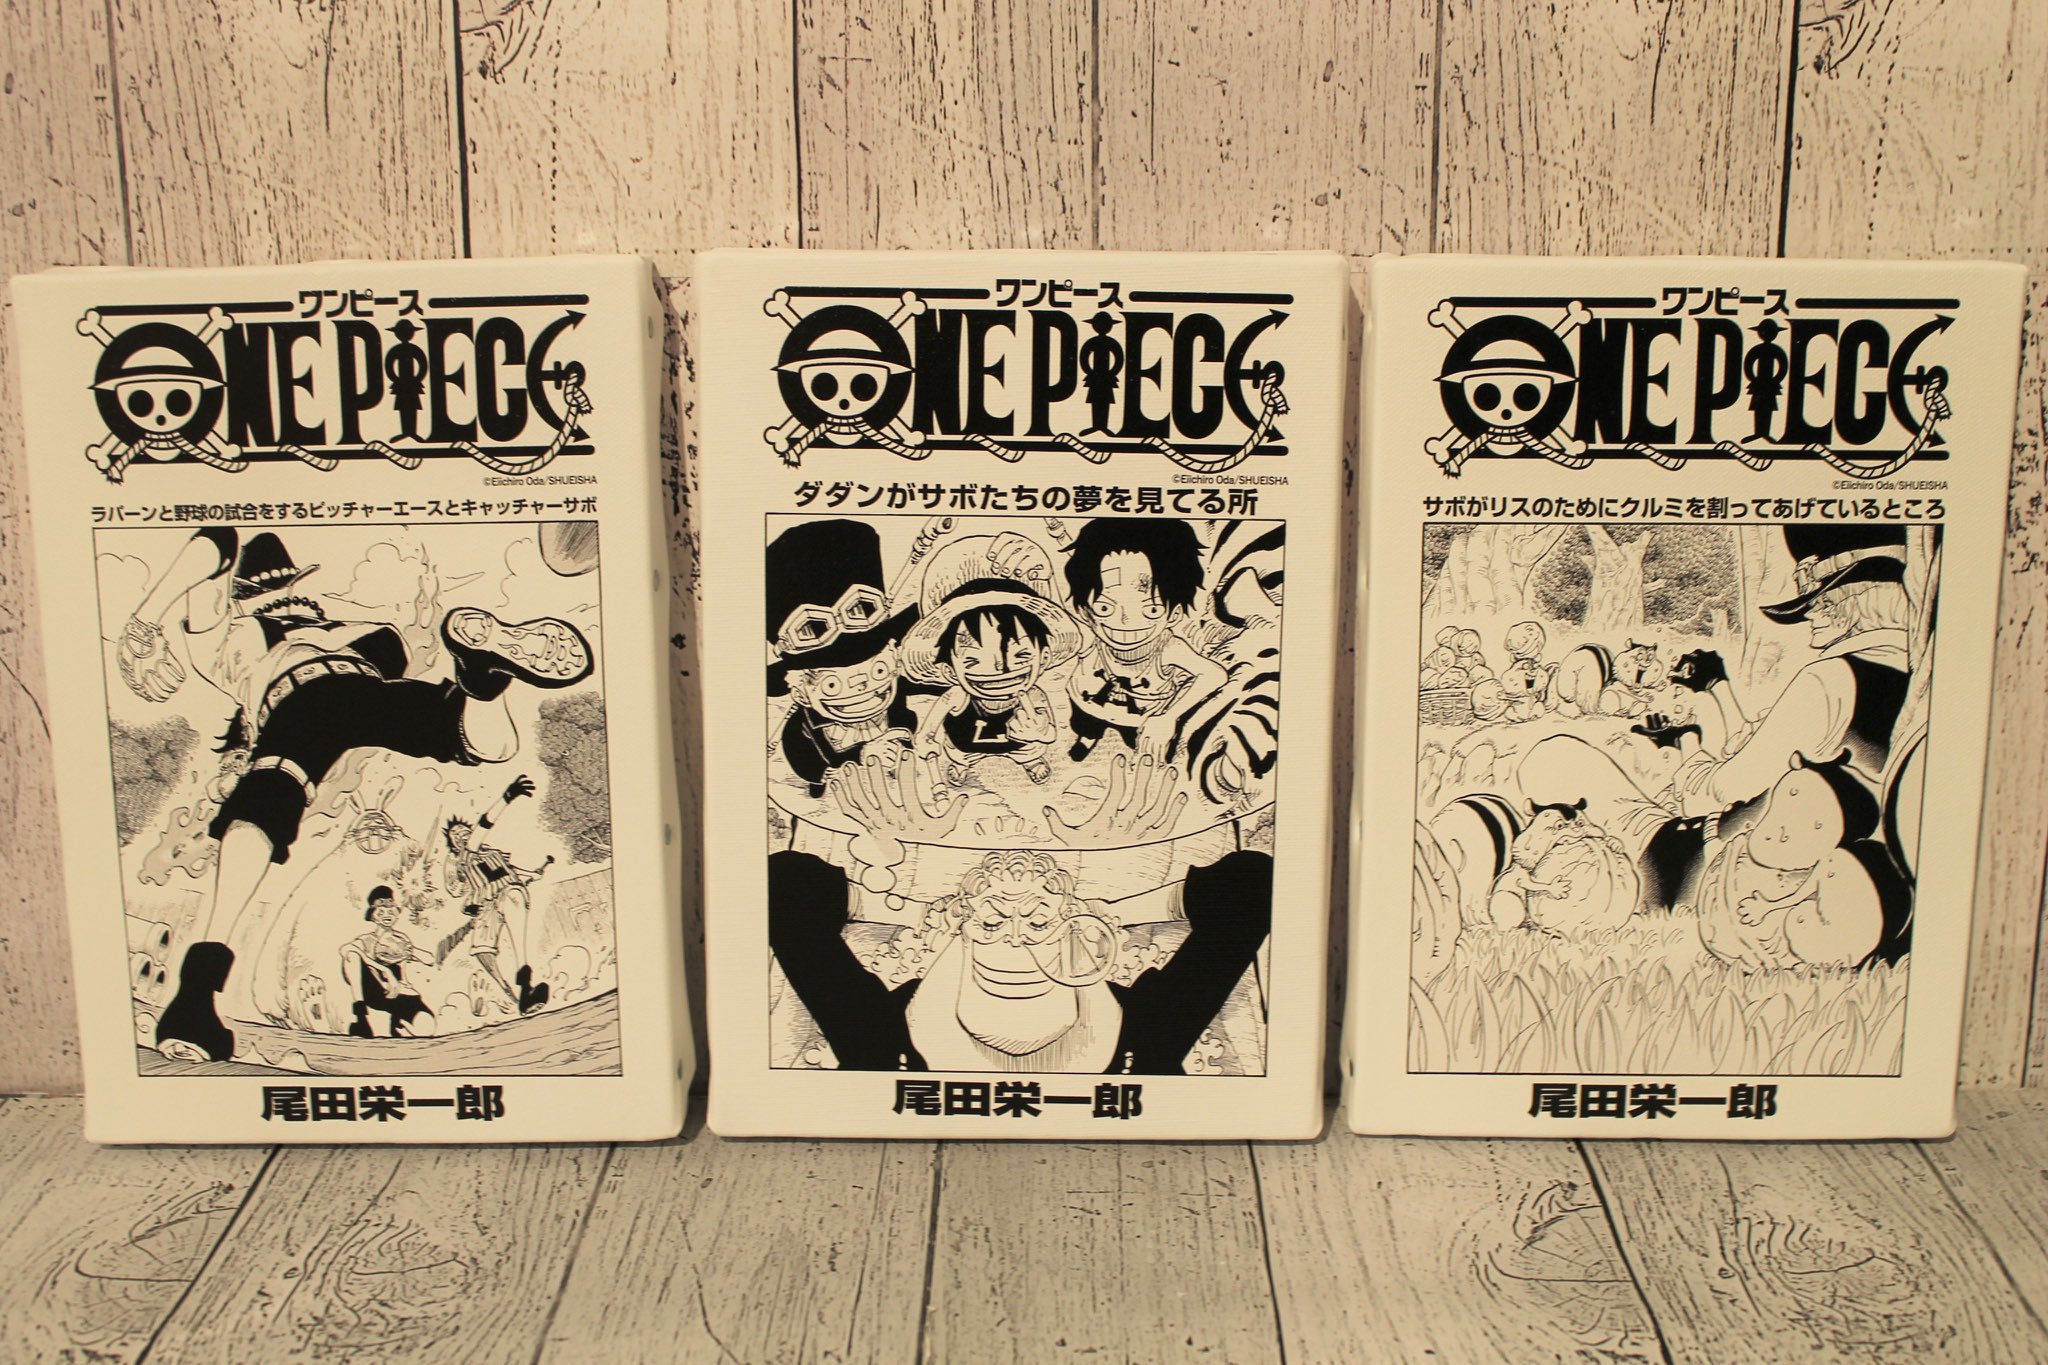 One Piece麦わらストア渋谷本店 おすすめ 原画商品 扉絵アートボード 各3 080円 税込 好評発売中 麦わらストア Onepiece T Co Sixcer7zox Twitter